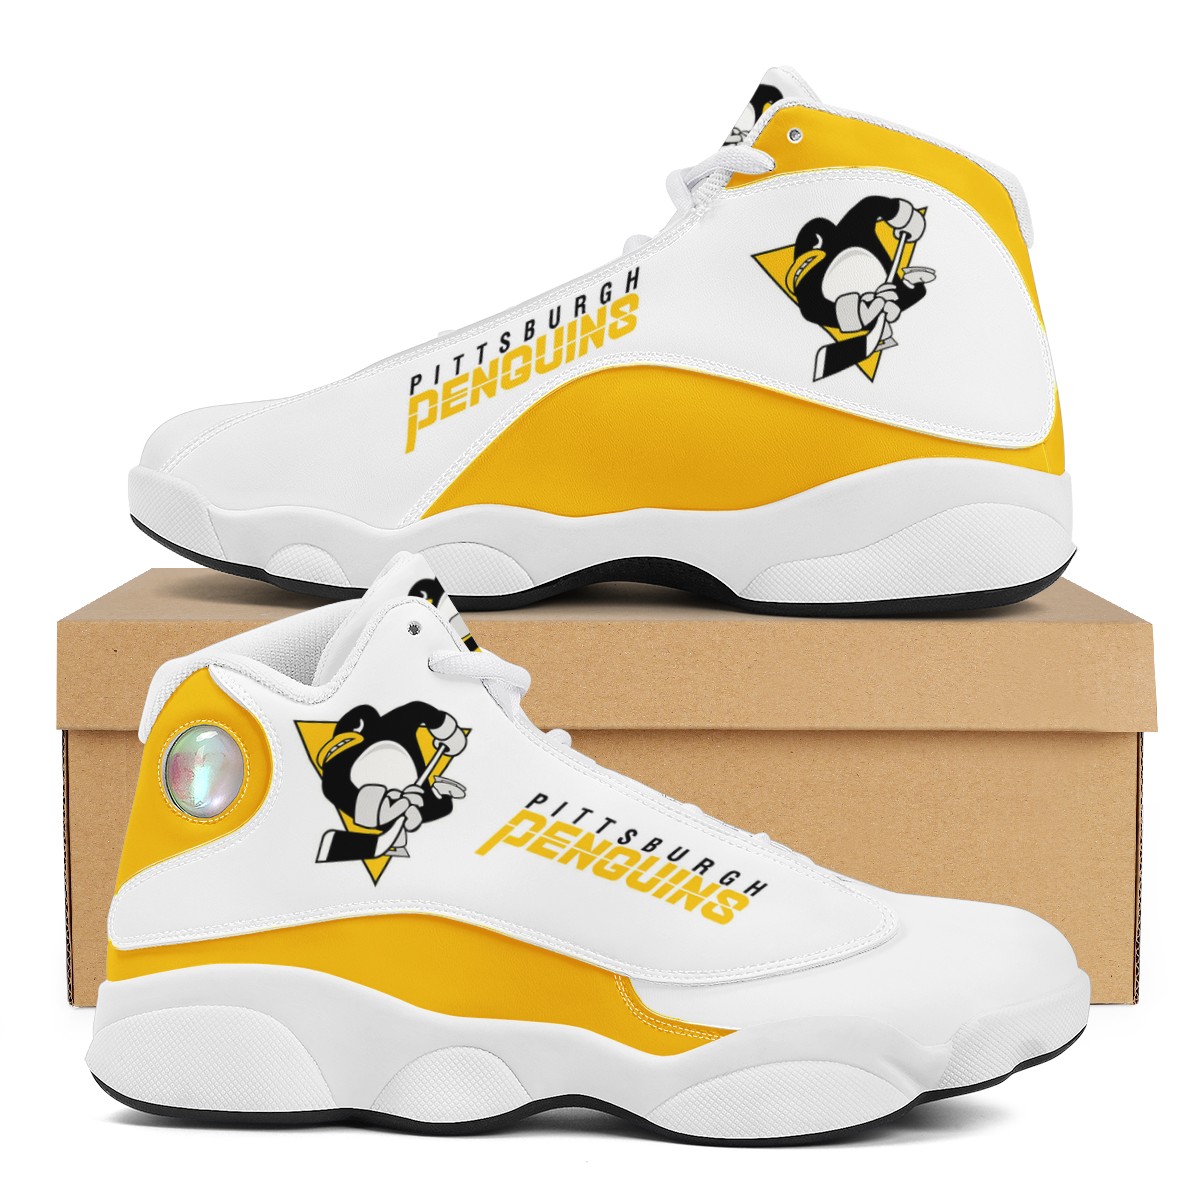 Men's Pittsburgh Penguins Limited Edition JD13 Sneakers 001